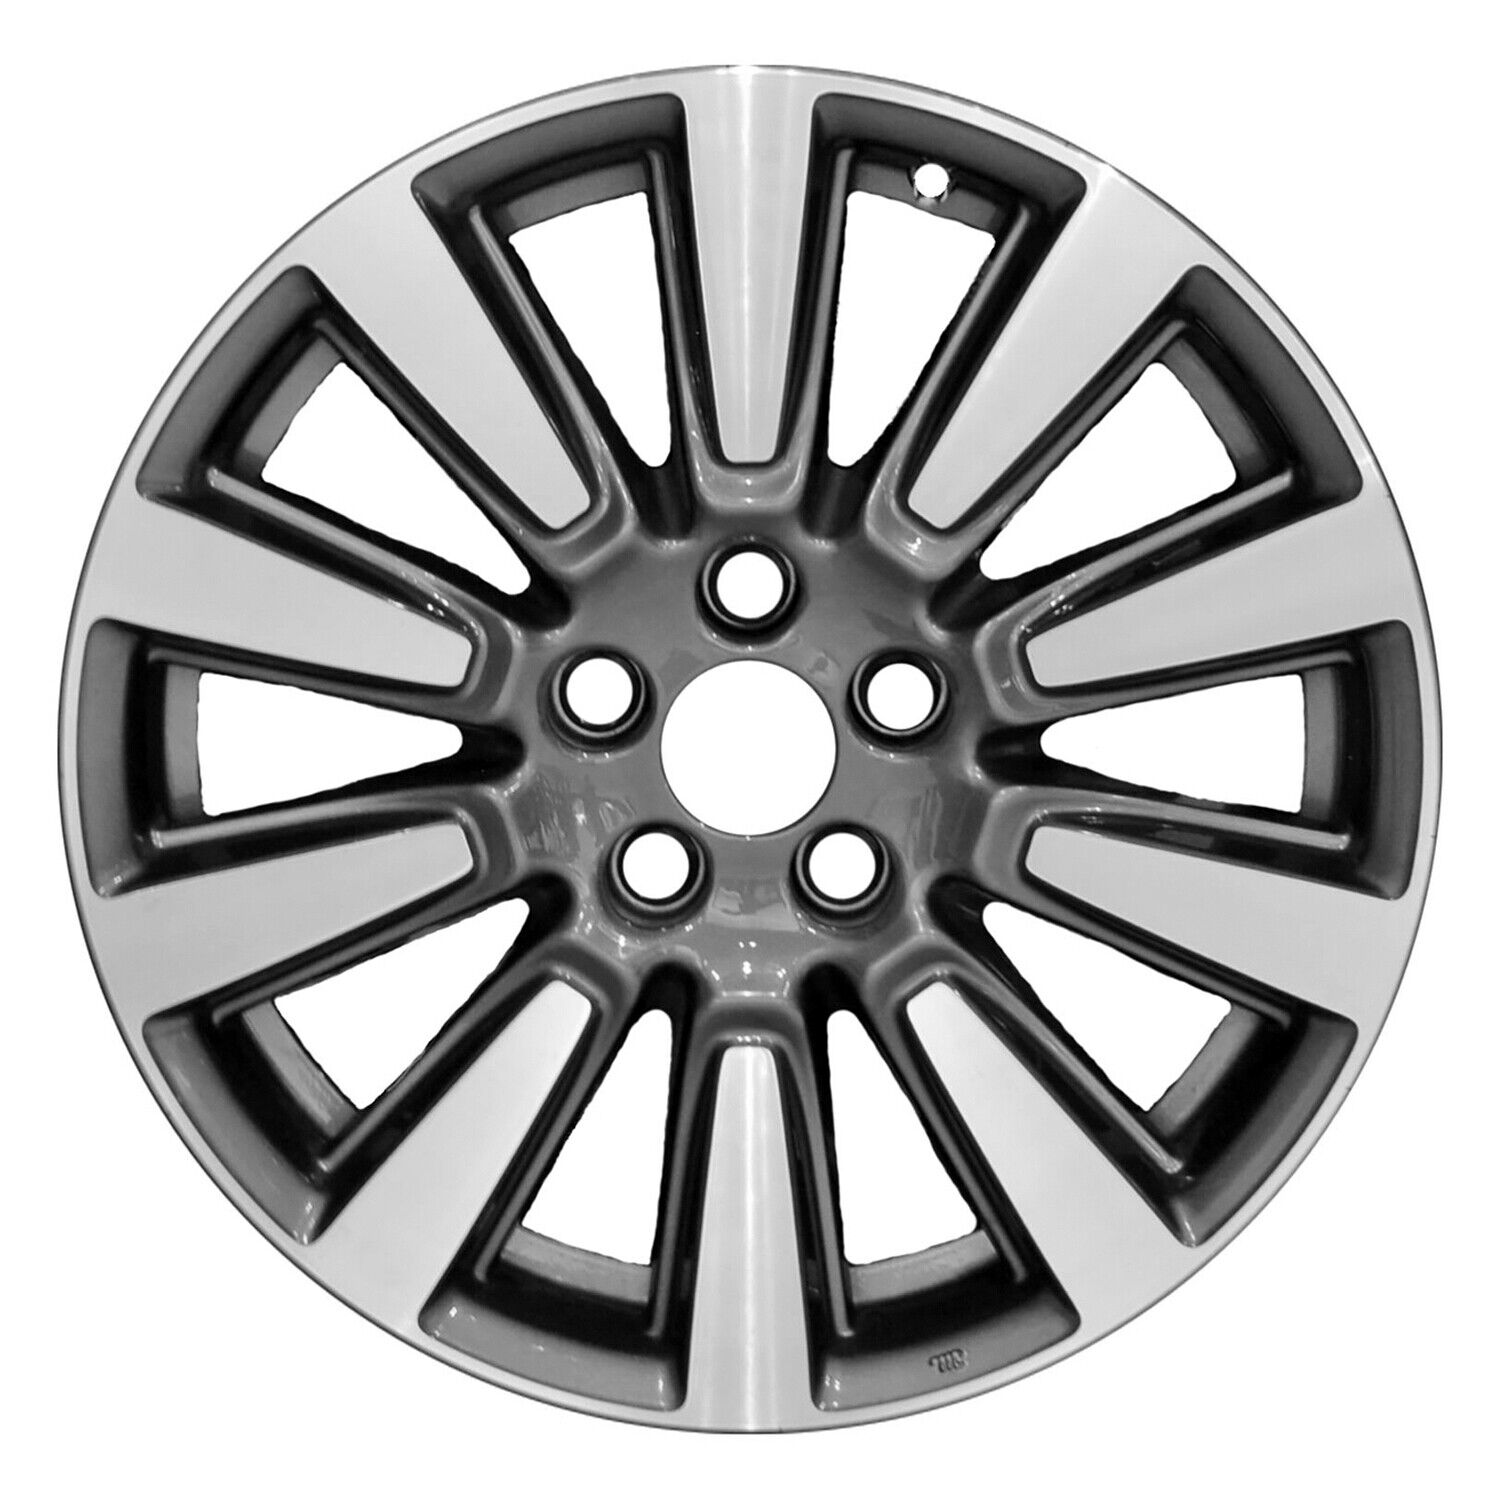 69583 Reconditioned OEM Aluminum Wheel 18x7 fits 2010-2020 Toyota Sienna